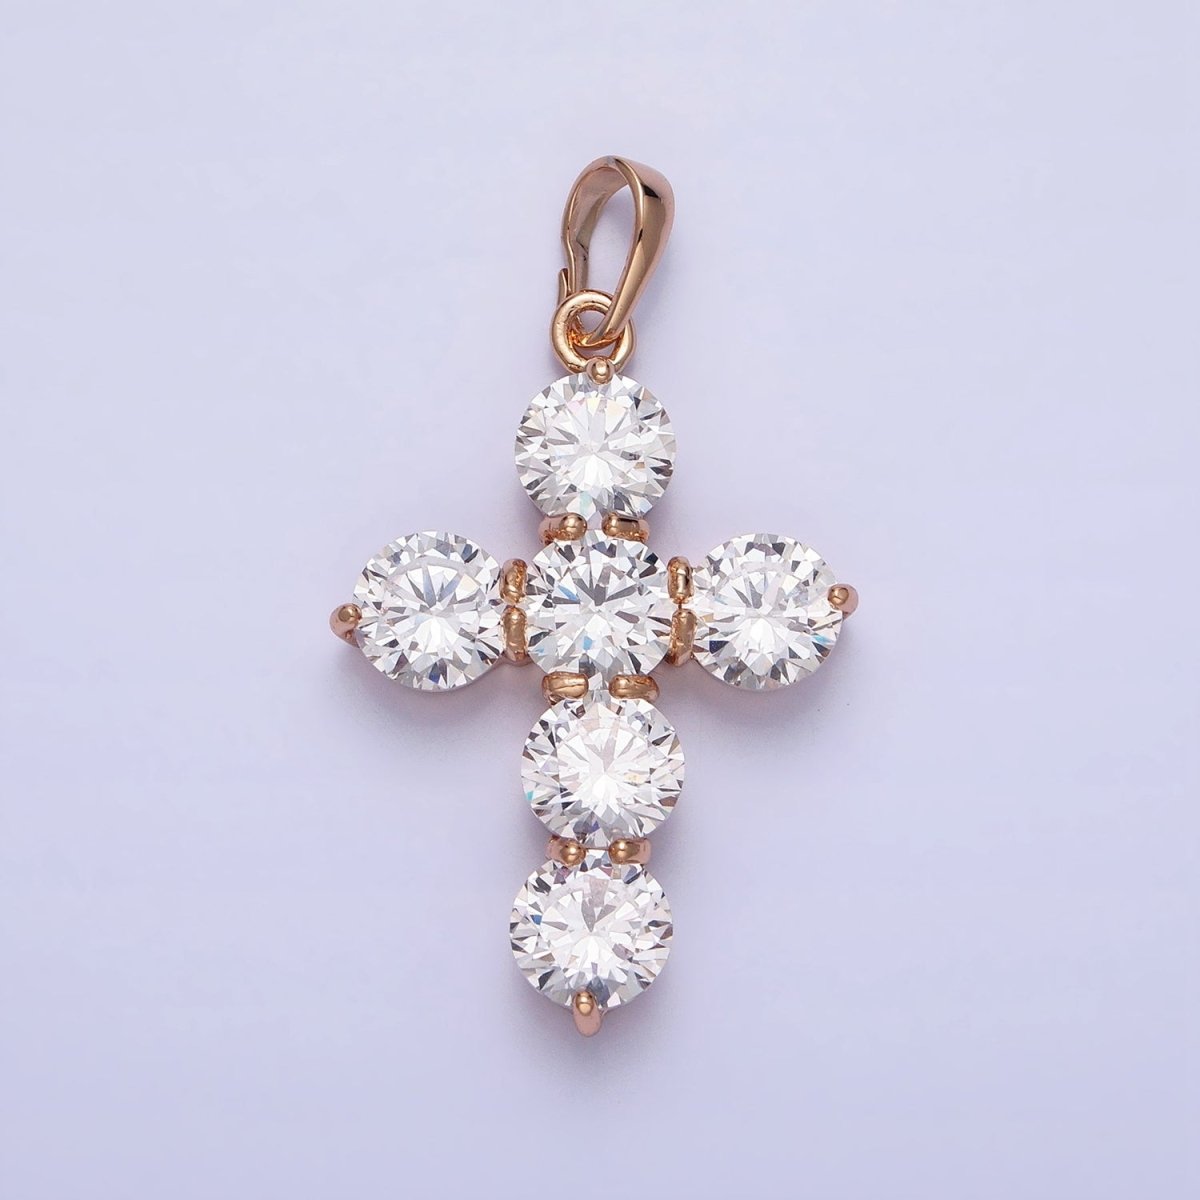 Dainty Gold Cross Cubic Pendant Necklace, 18K Gold Filled CZ Diamond Cross Charm Religious Jewelry Making AA251 - DLUXCA